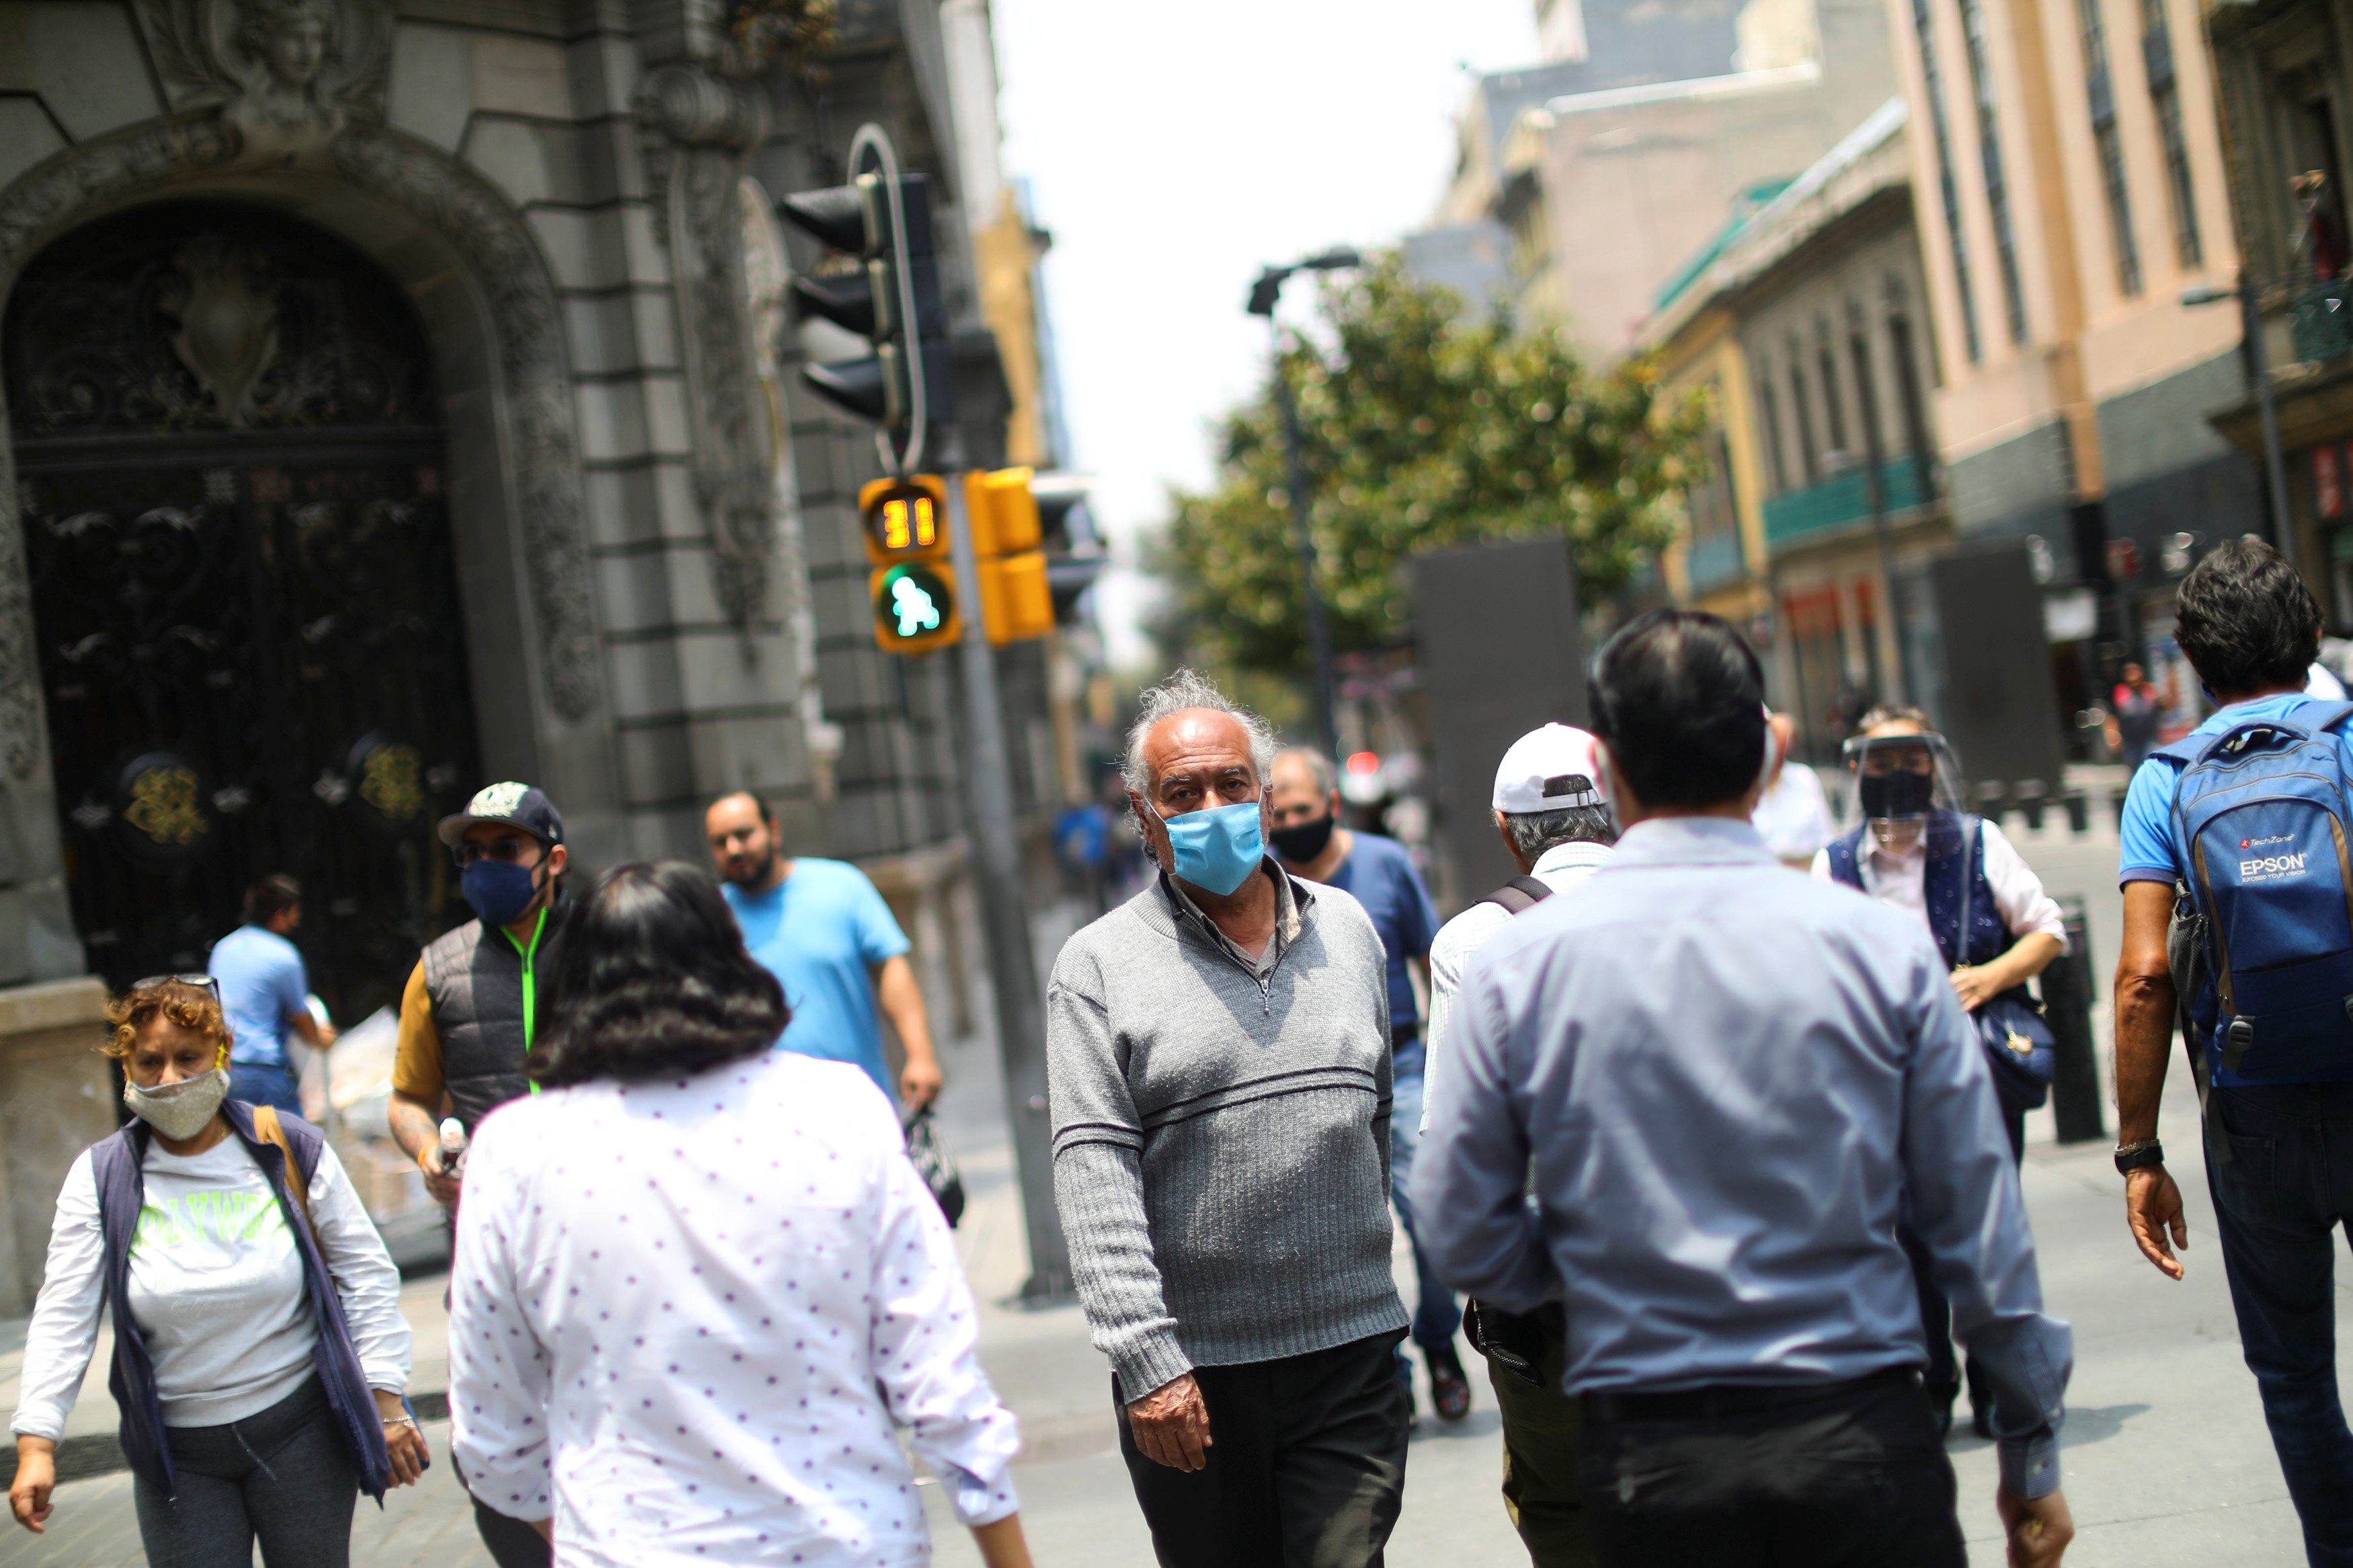 People walk on a street during the start of gradual reopening of commercial activities in downtown Mexico City, as the coronavirus disease (COVID-19) outbreak continues, Mexico June 30, 2020. REUTERS/Edgard Garrido